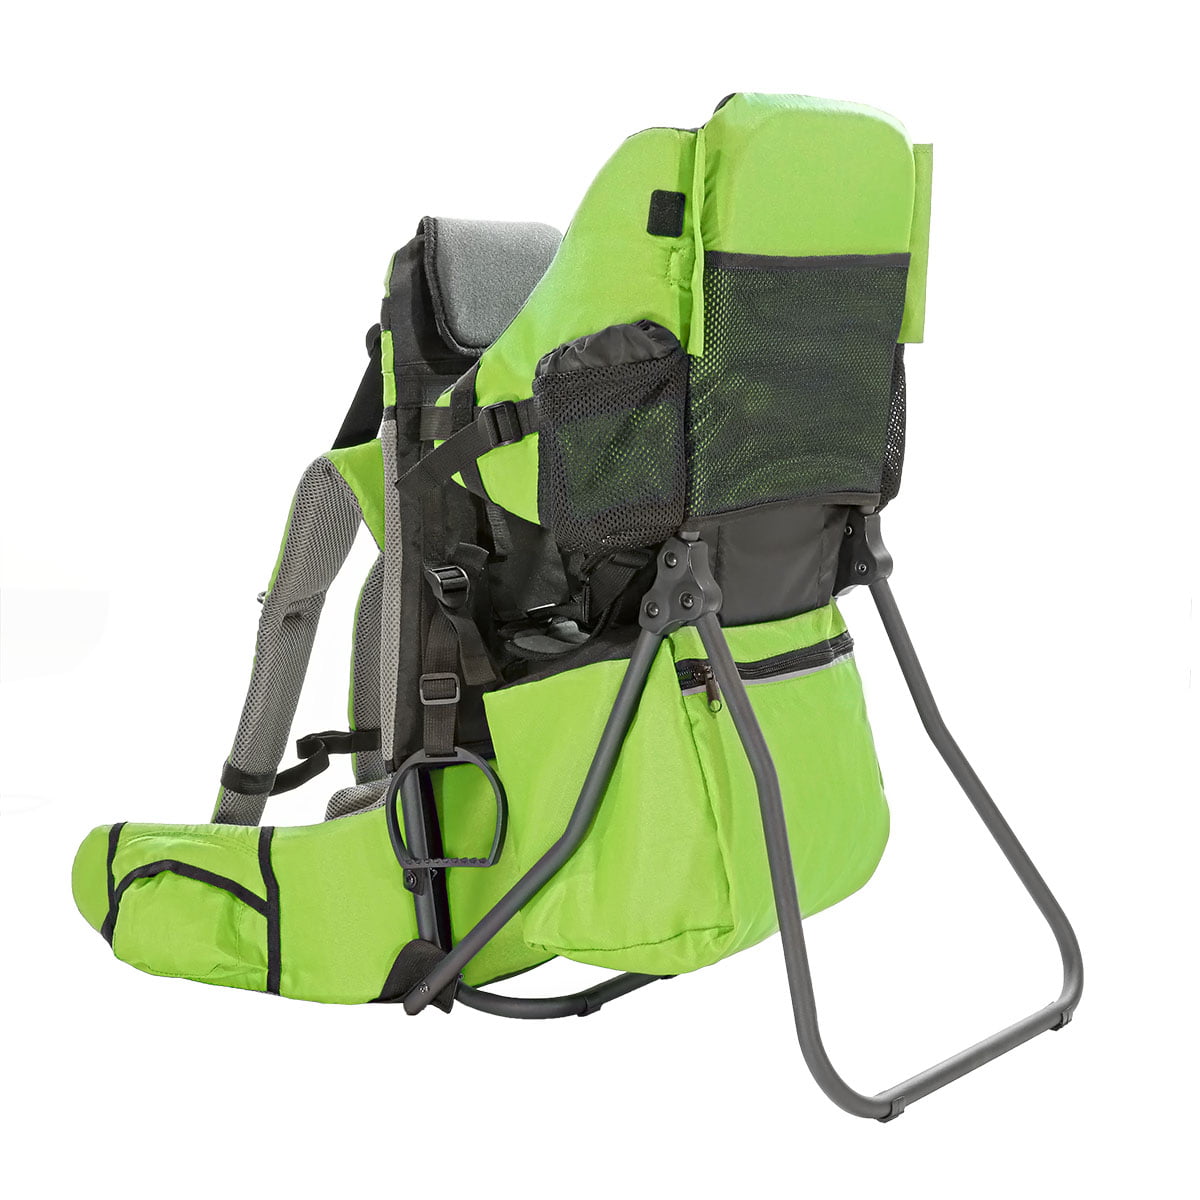 ClevrPlus Hiking Light Baby Backpack Carrier with Shade Visor, Green